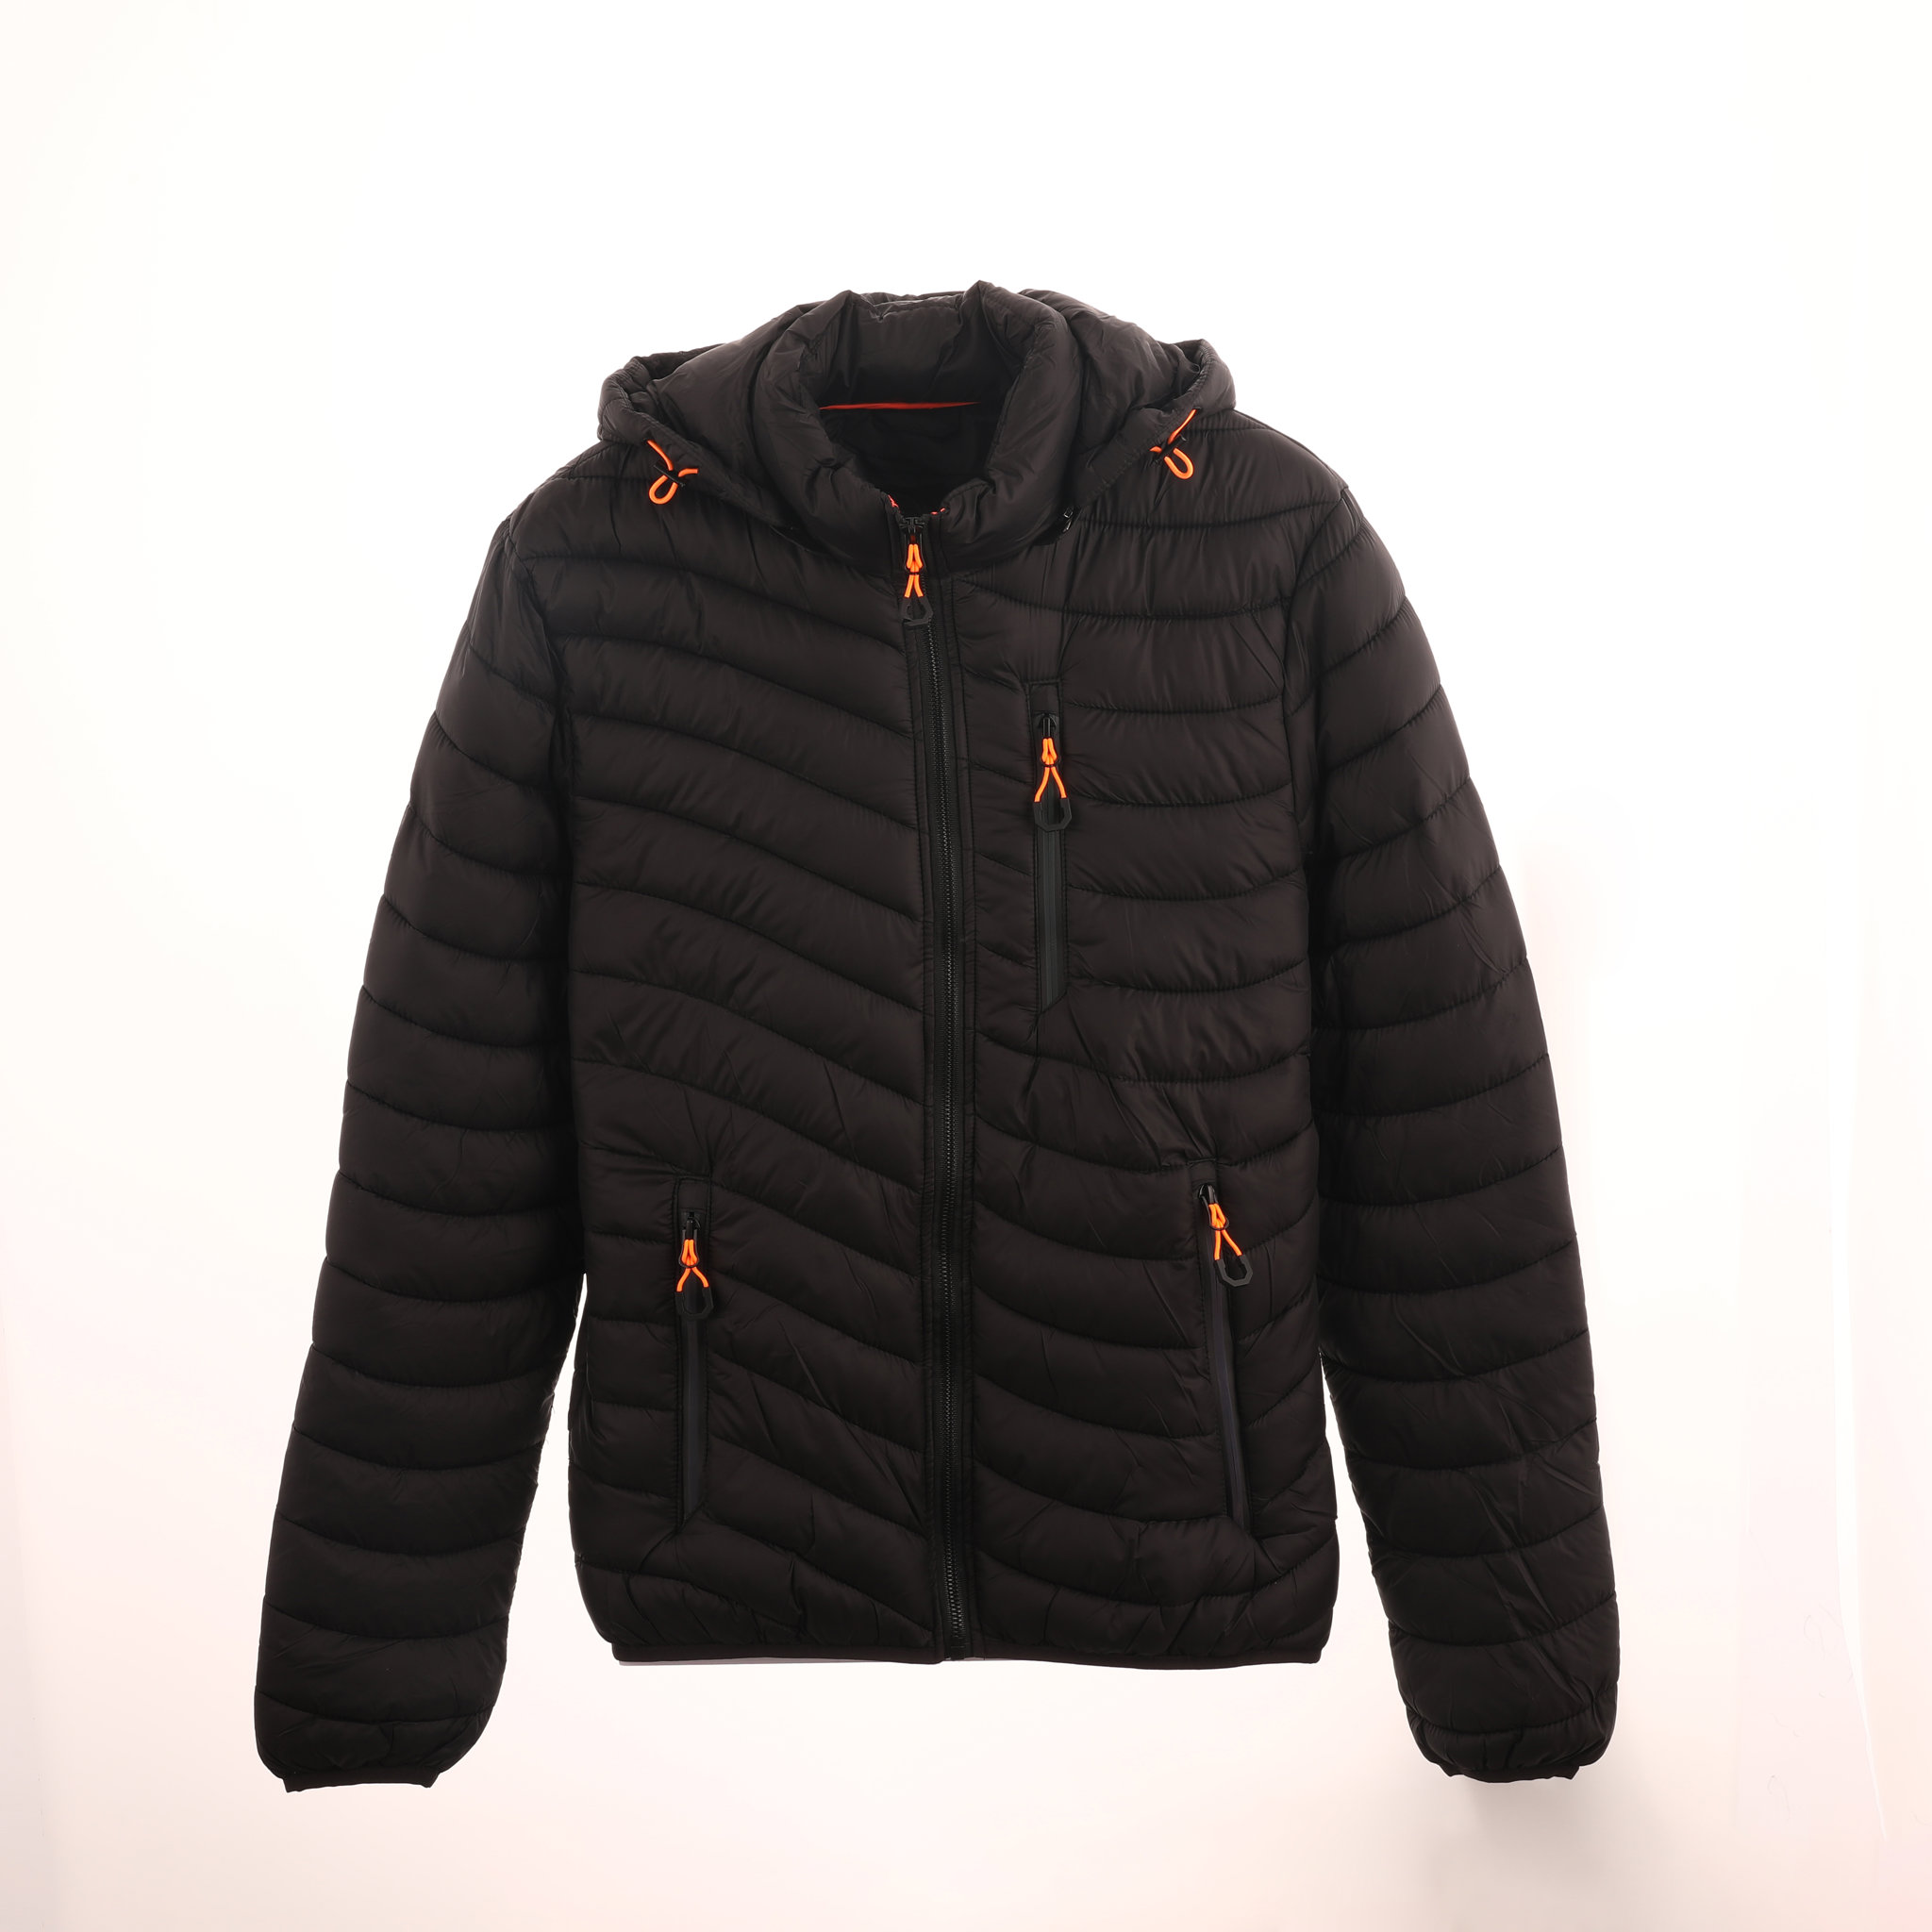 Men's Quilted Jacket With Detachable Hood3